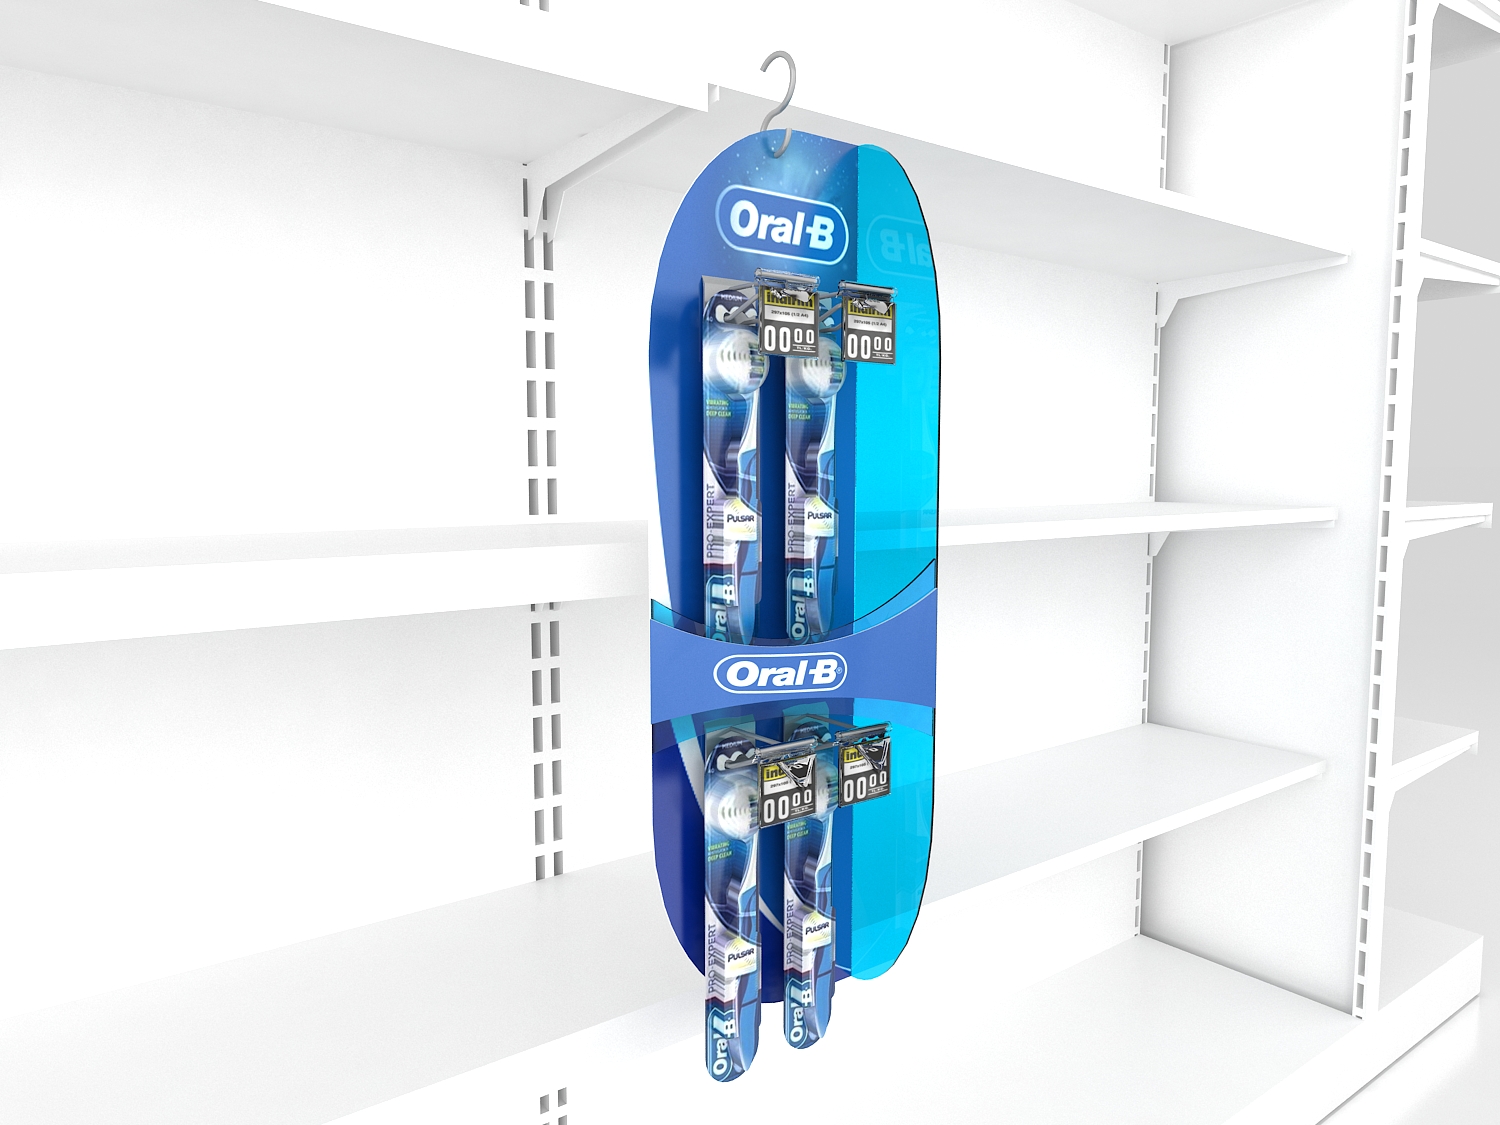 Oral-B Hanging Stand